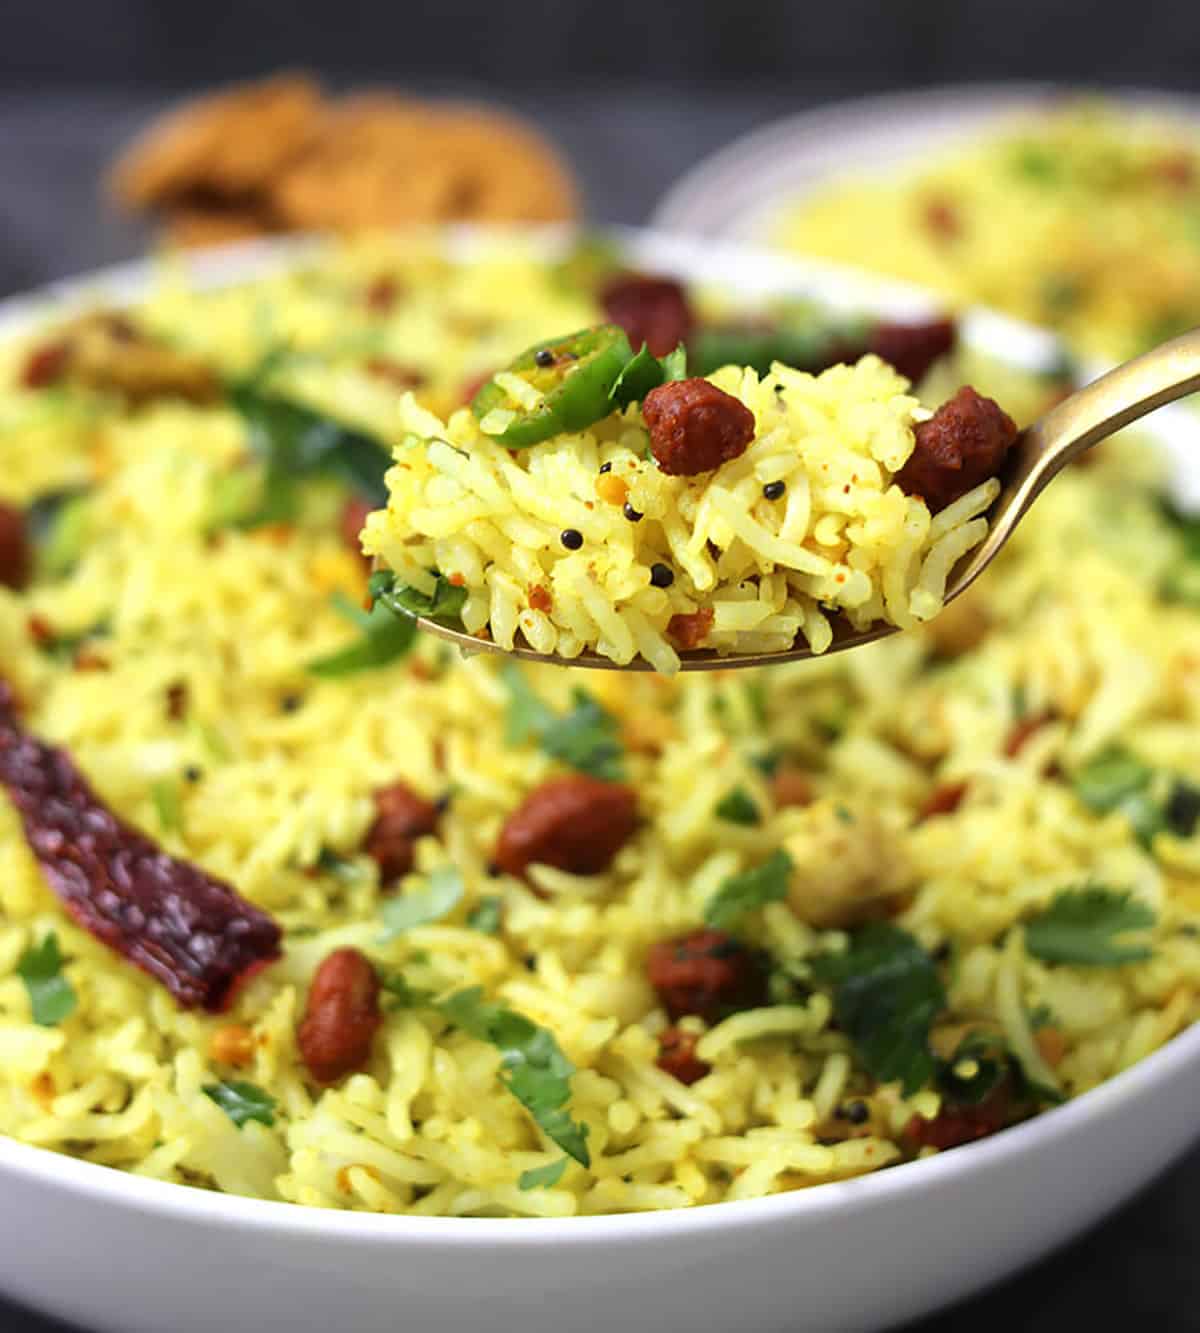 Holding lemon rice or chitrannam in spoon #lunchboxrecipes #noonionnogarlic